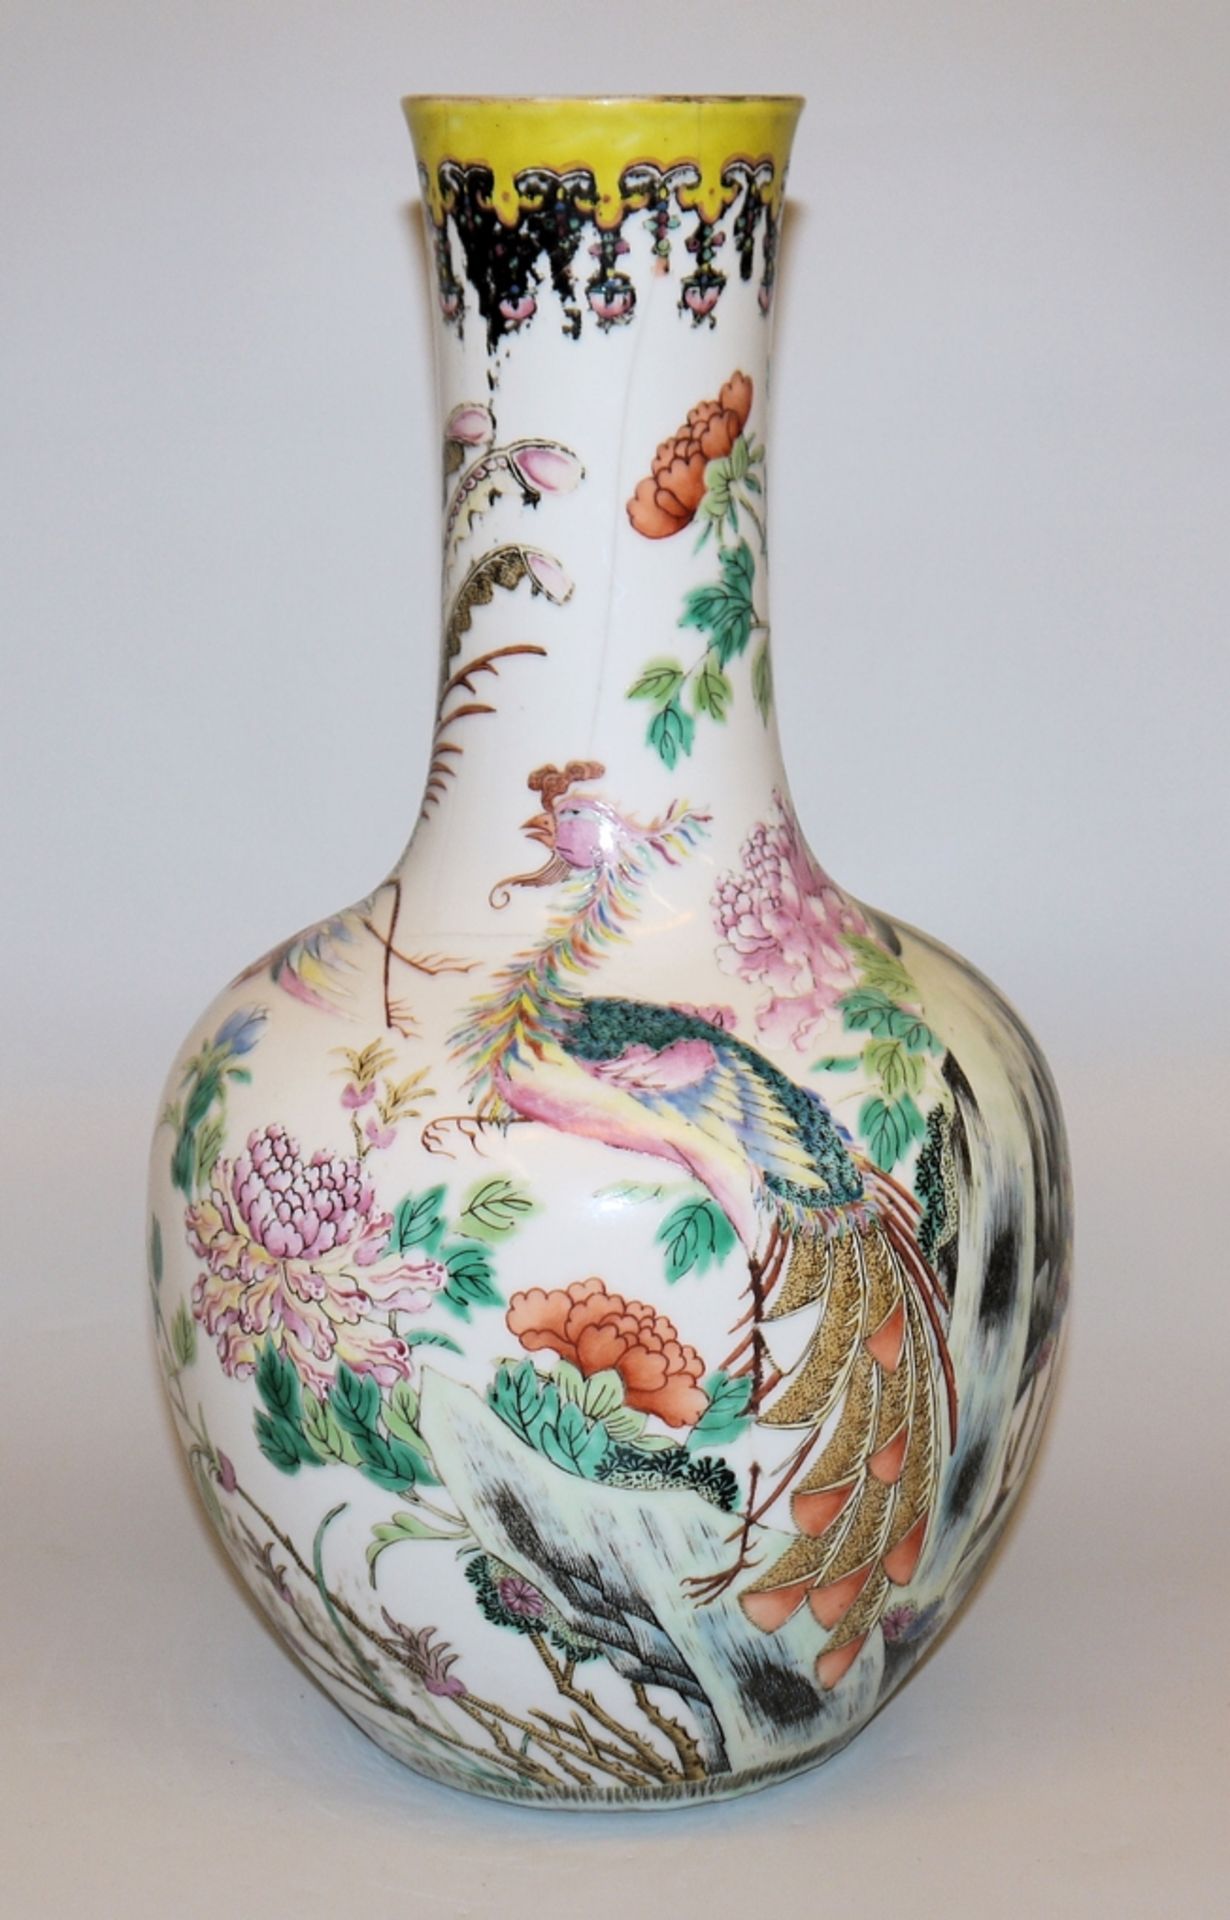 Tianqiuping vase with phoenix in landscape, Republic period, China, early 20th century